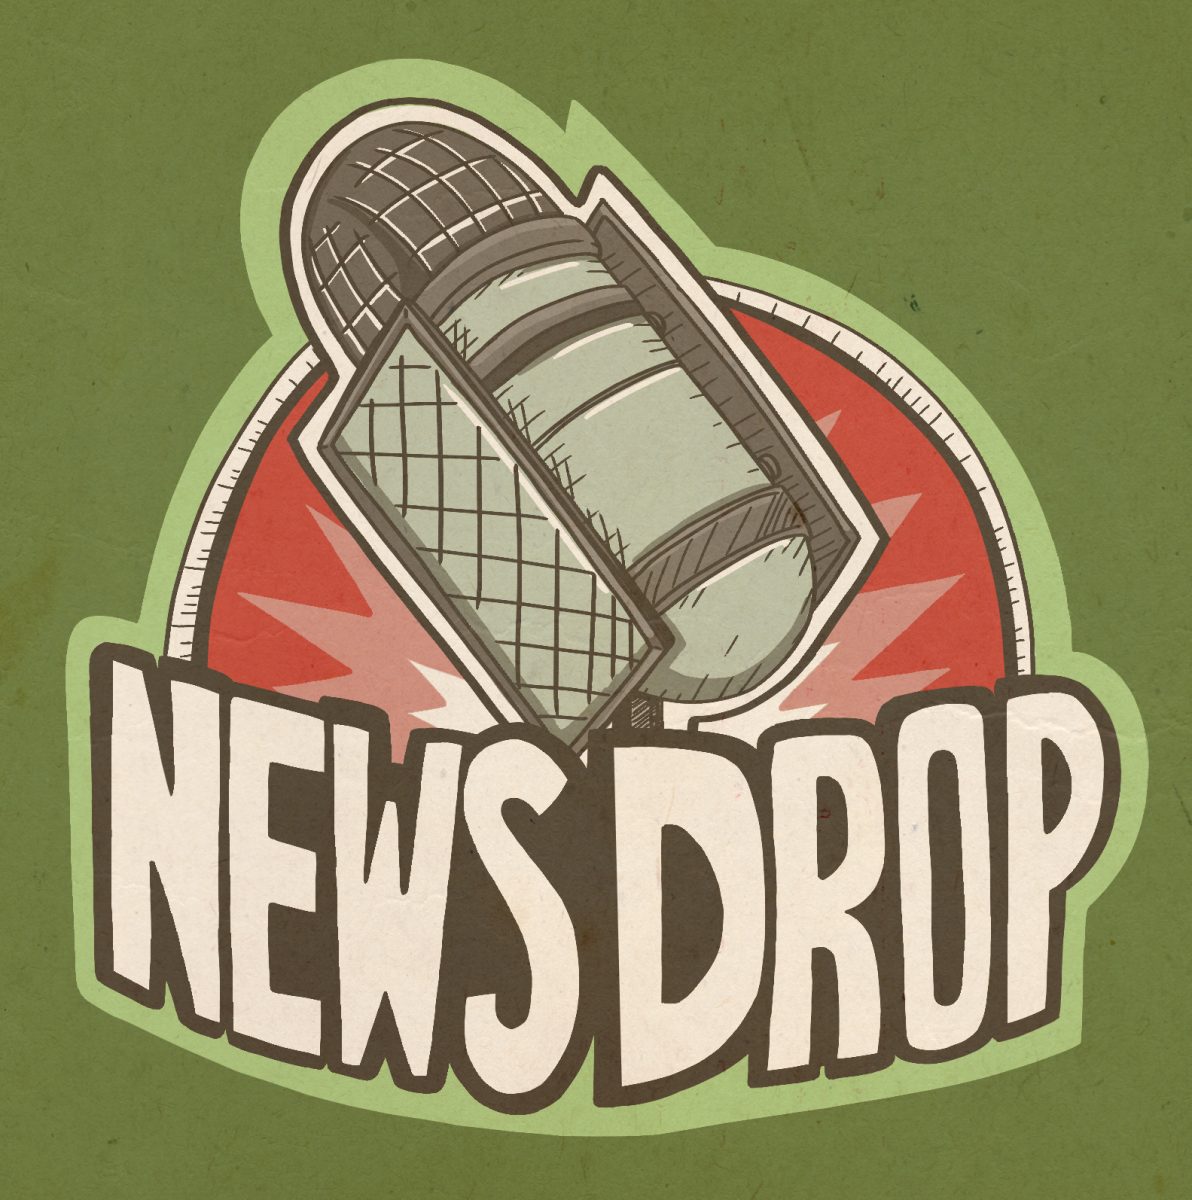 The News Drop Podcast - Episode 1 feat. Black Student Union President Jay Adams-Thomas